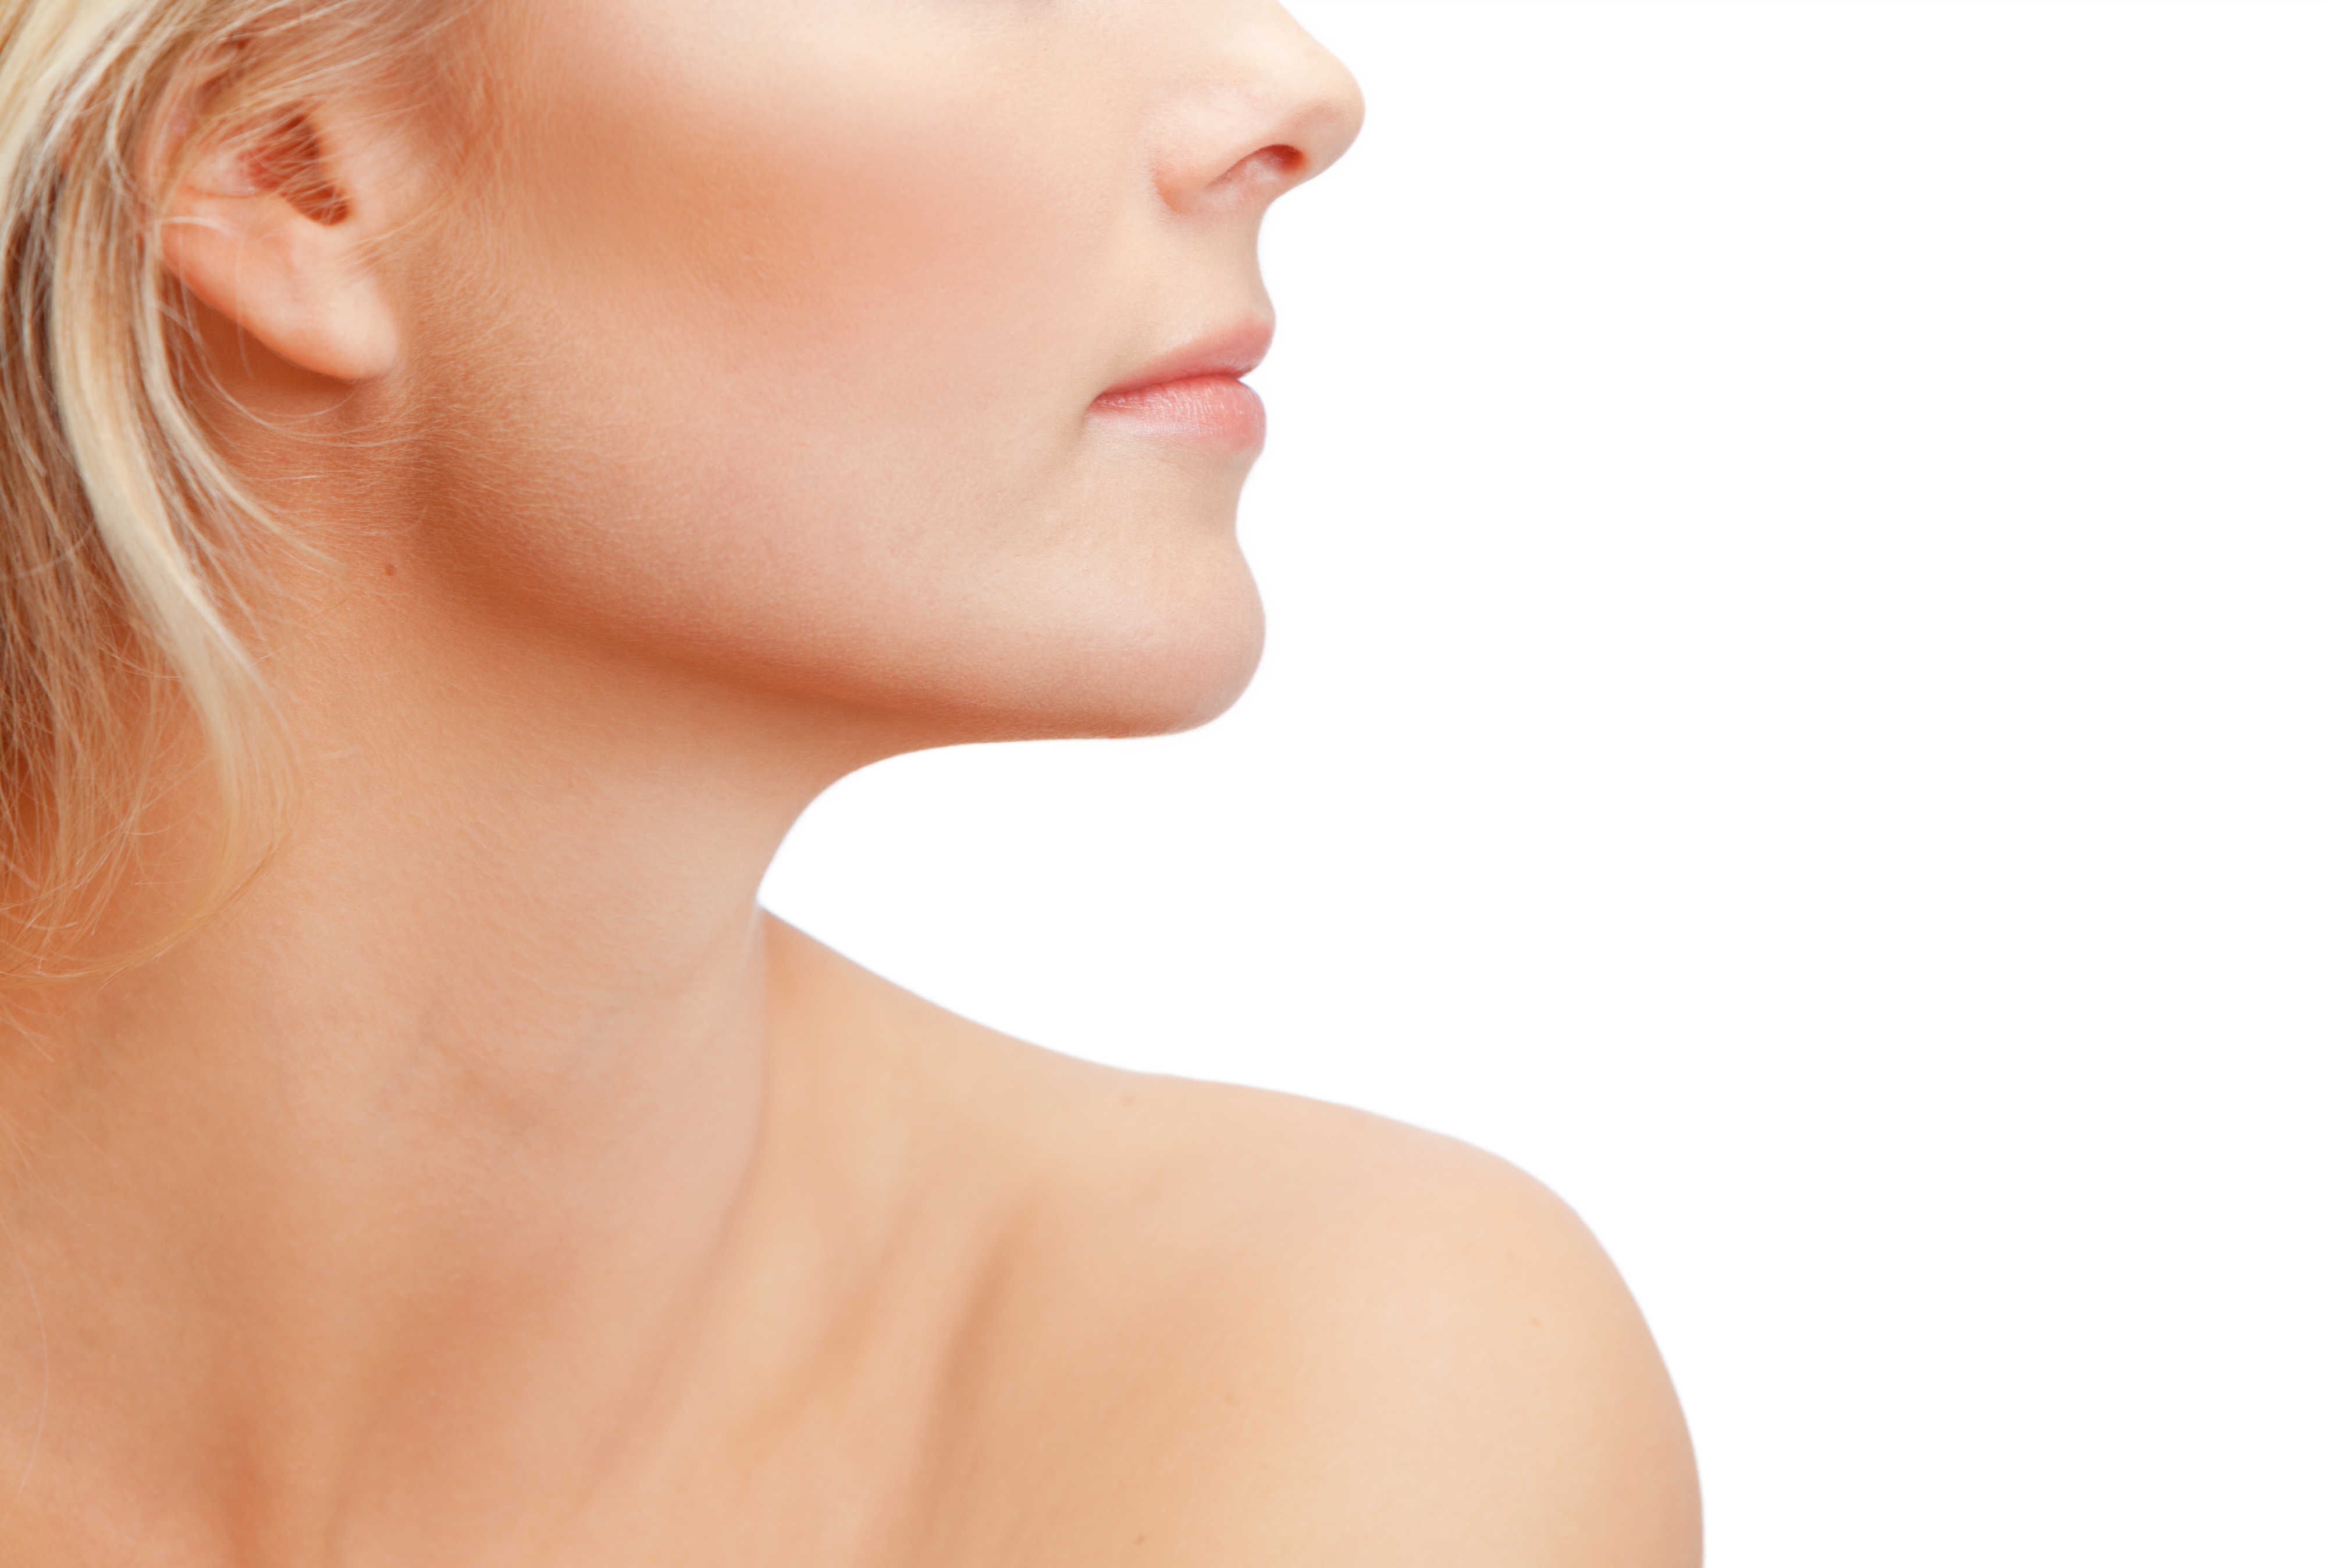 Is surgery of the neck better than minimally invasive procedures?